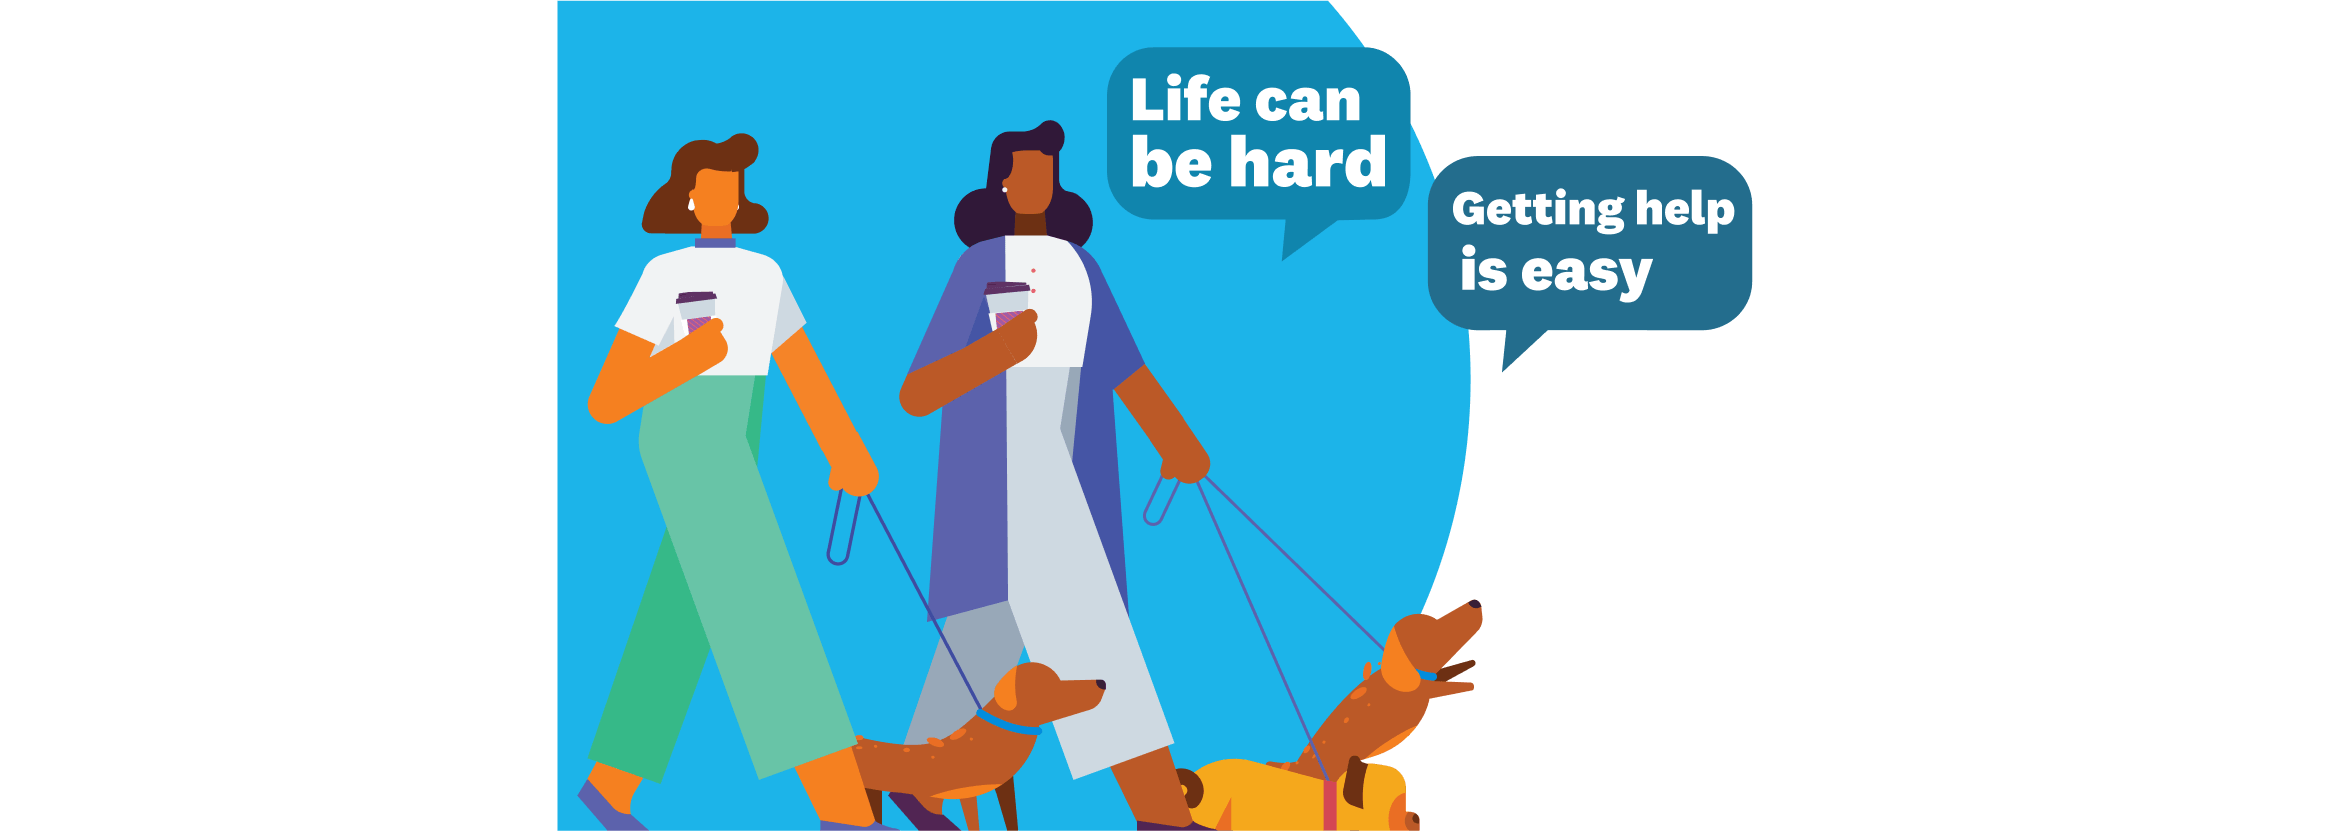 Two people walking their dogs and speech bubbles saying, ‘Life can be hard’ and ‘Getting help is easy’.